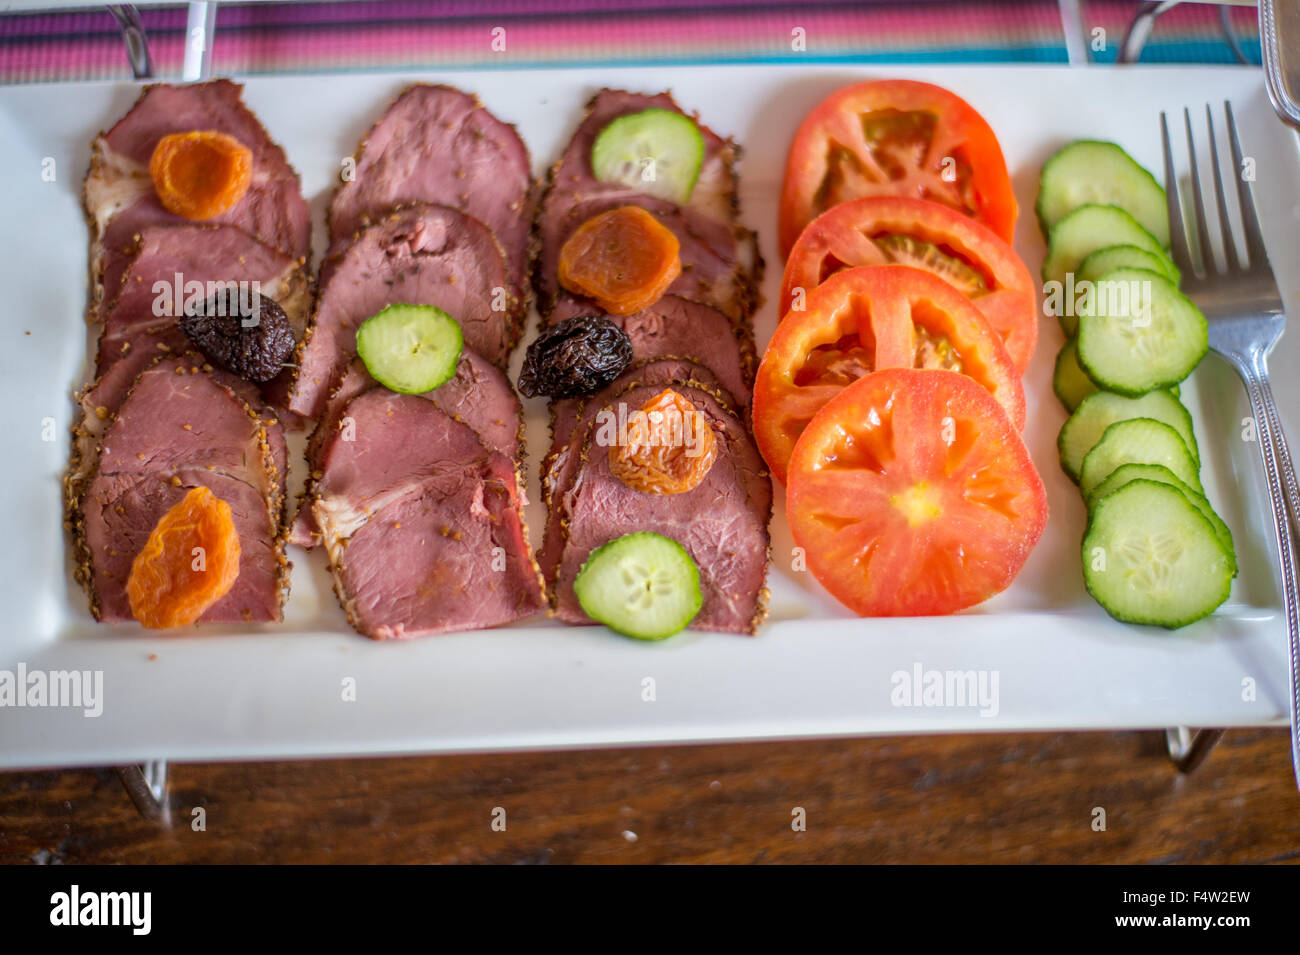 Kasane, Botswana - Plate of meats and vegetables. Stock Photo